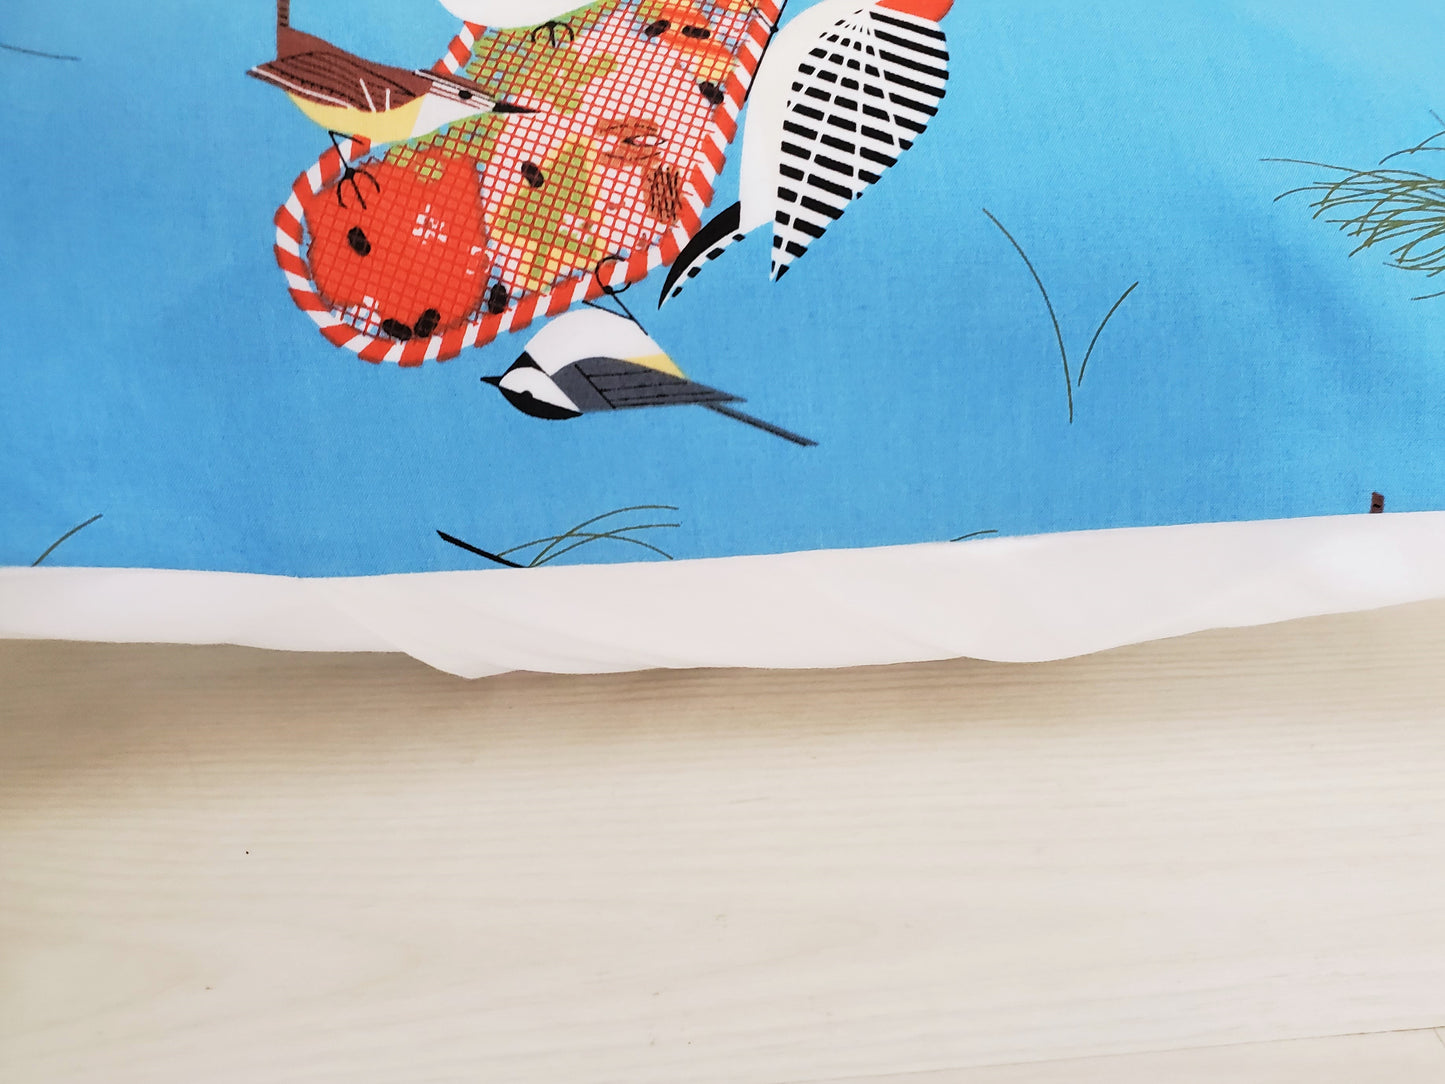 Organic Cotton Holiday Accent Pillow Covers in Charley Harper Prints